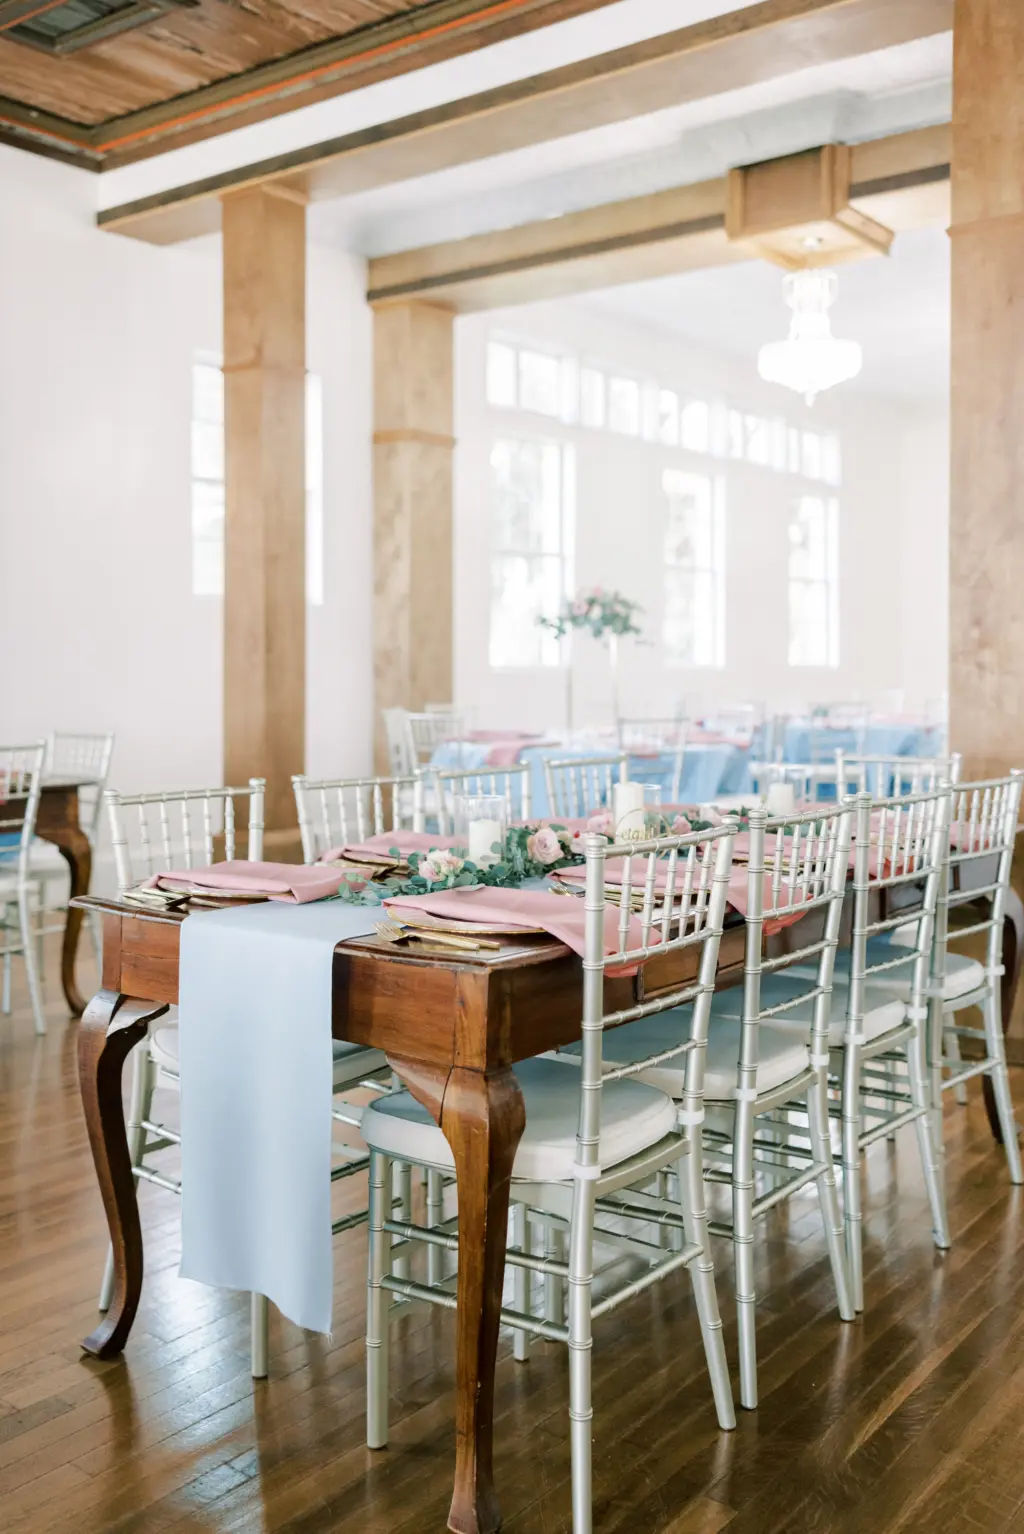 Indoor Dusty Blue and Pink Wedding Reception Inspiration with Silver Chiavari Chairs | Tampa Bay Rental Company A Chair Affair